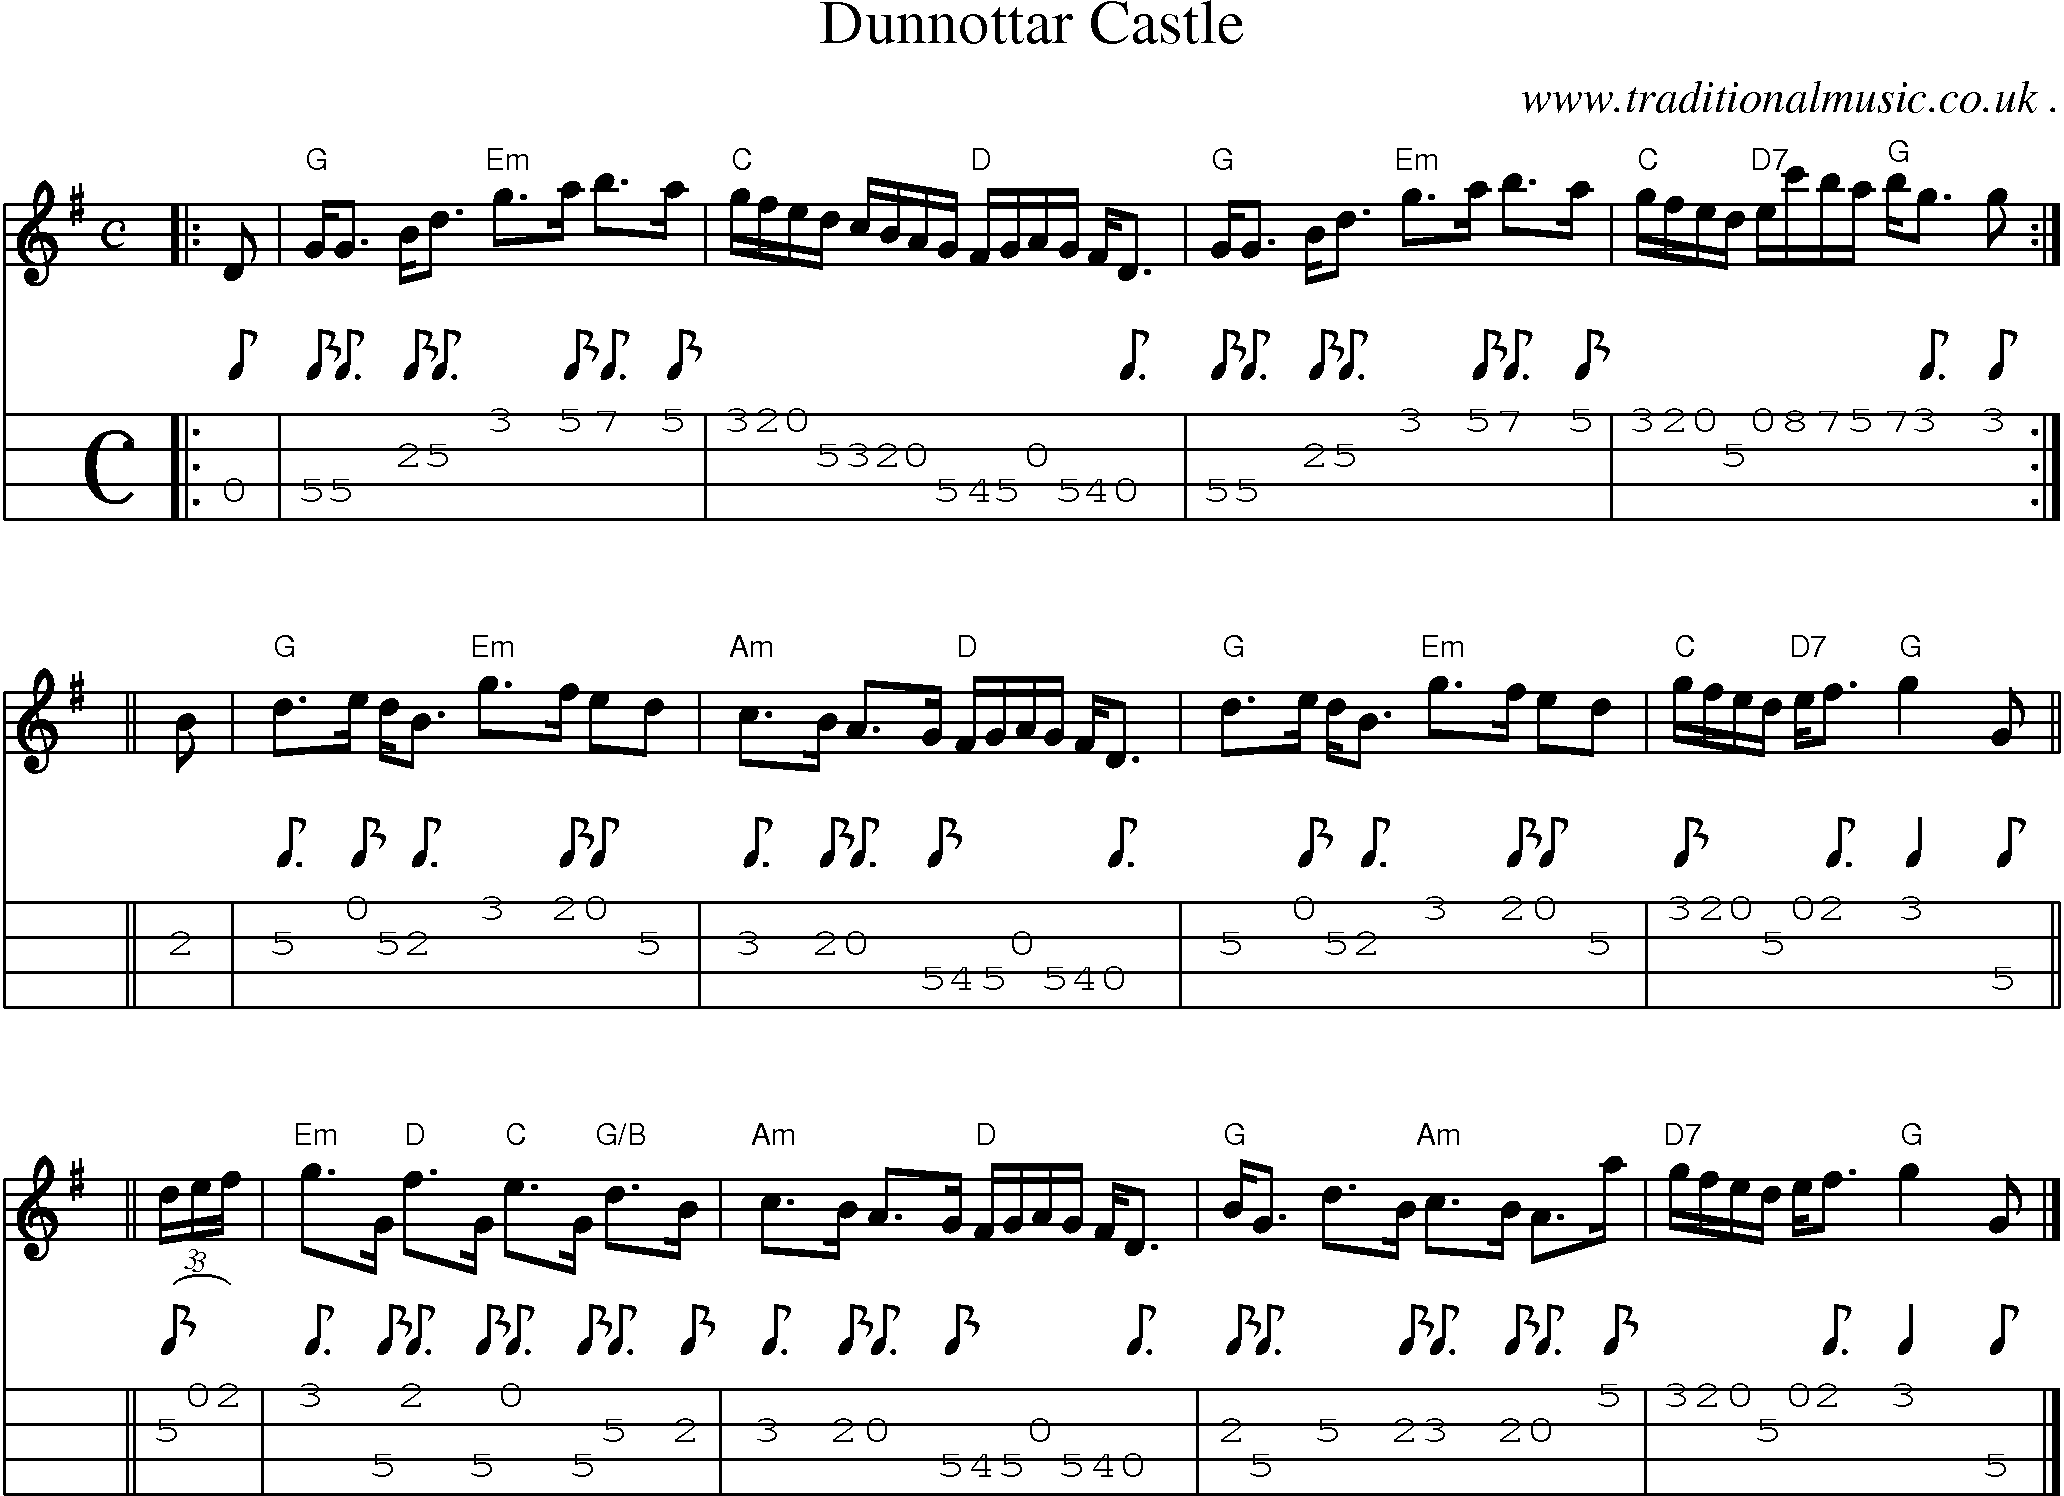 Sheet-music  score, Chords and Mandolin Tabs for Dunnottar Castle